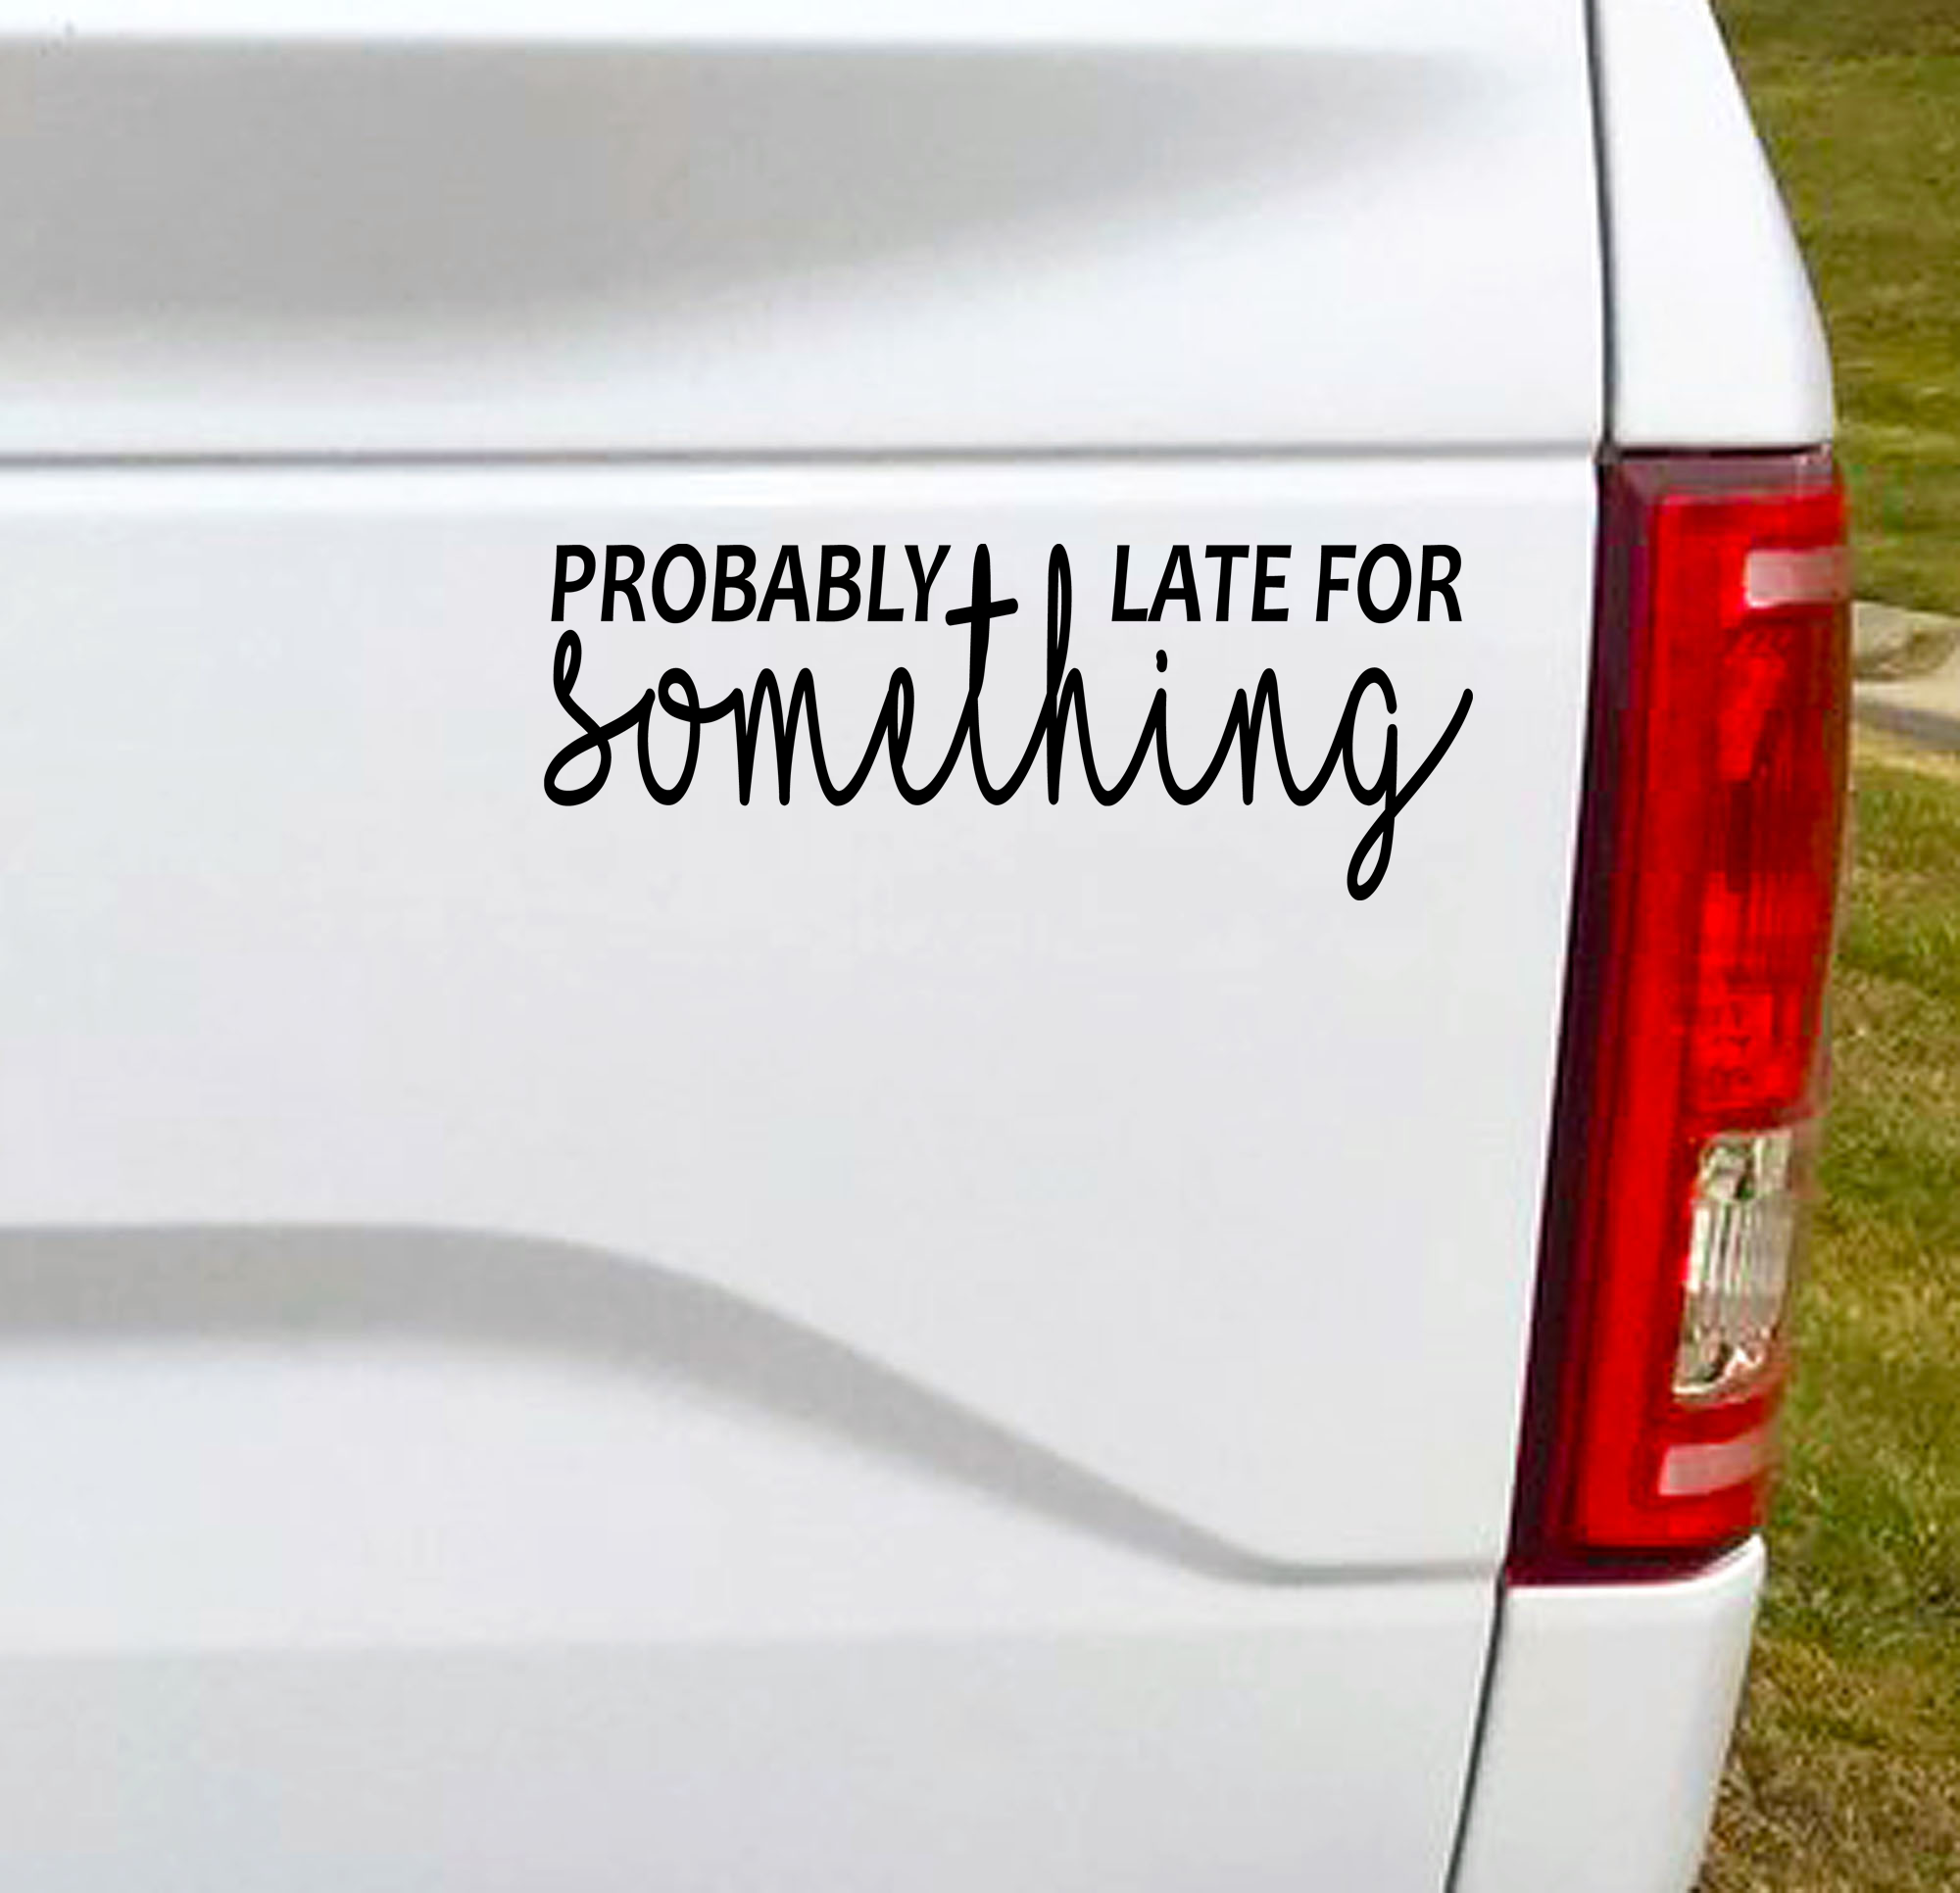 Probably Late For Something Vinyl Car Decal Bumper Sticker. Running late? Maybe! :P  6.5"W x 2.5"H Funny Car Decal, Car Sticker, Car Vinyl, Bumper Sticker, Vinyl Stickers, Vinyl Sticker.